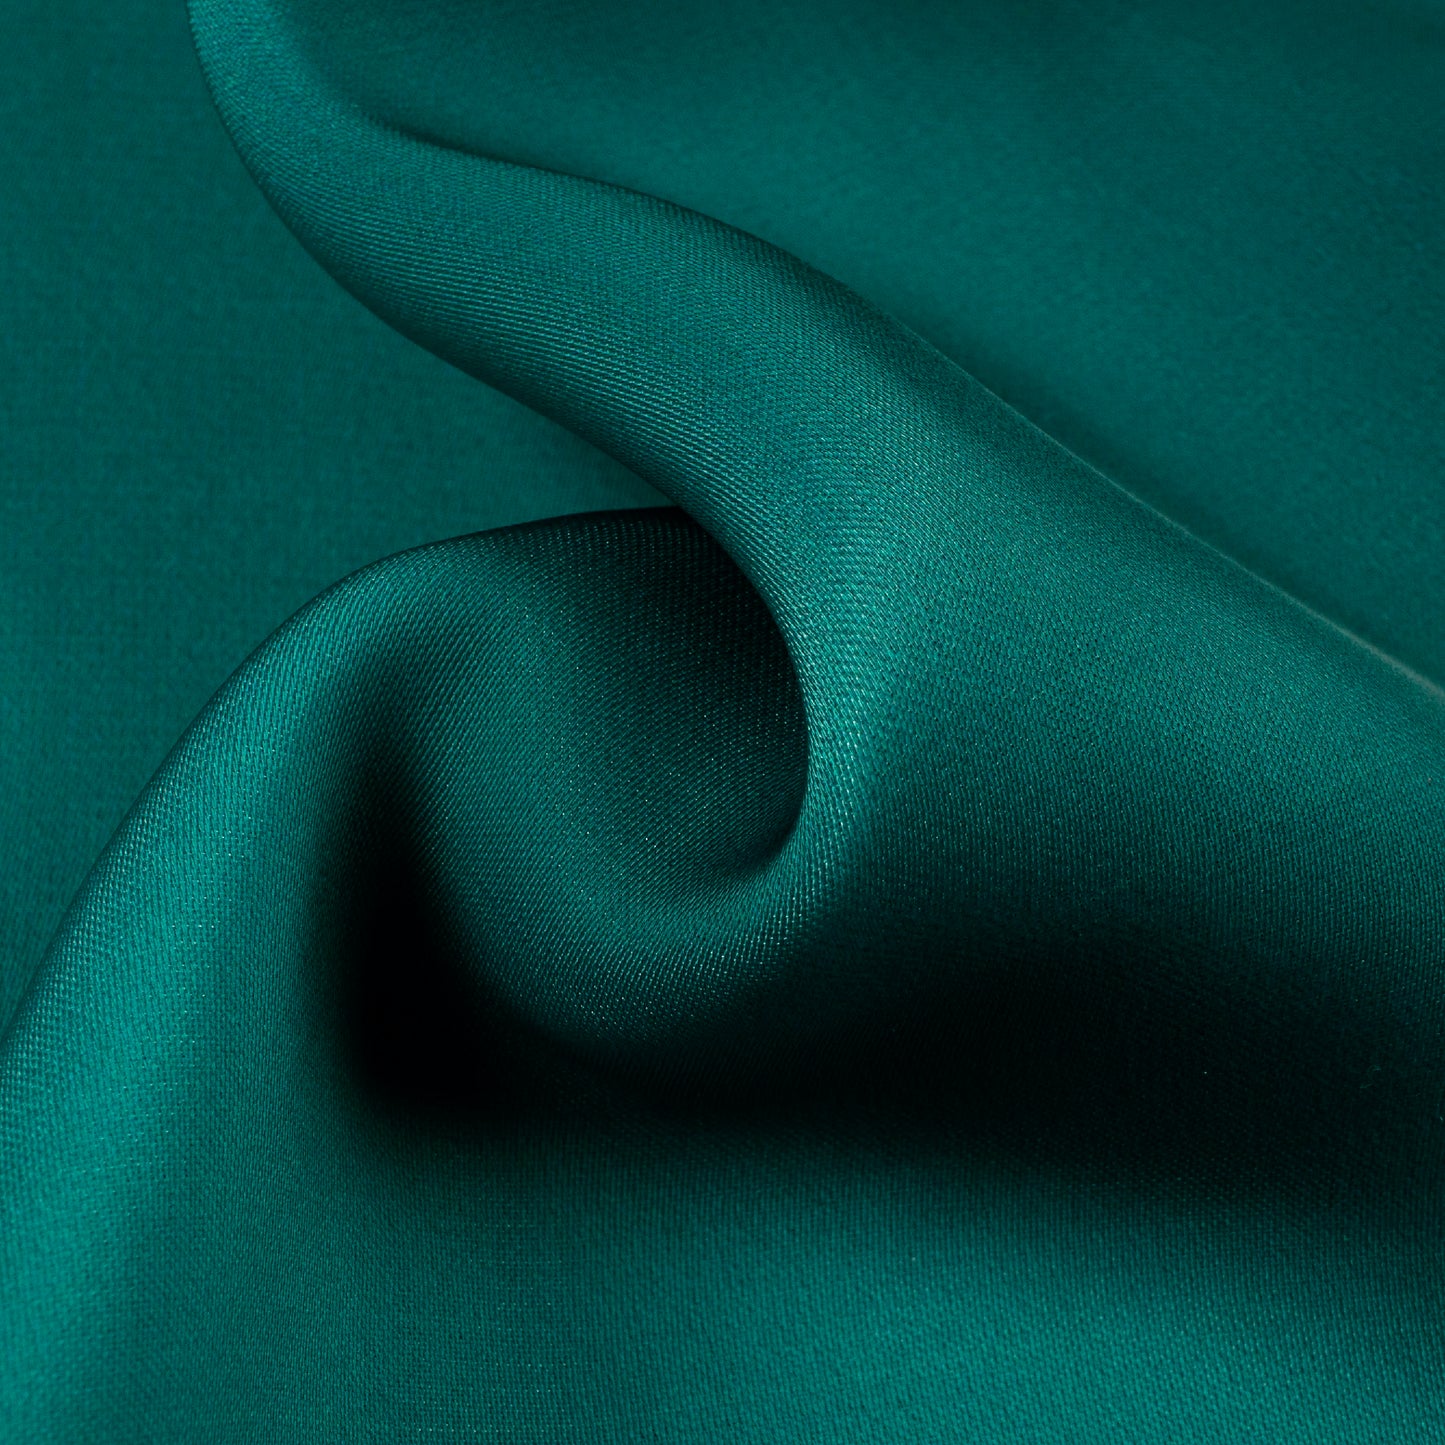 Green Ombre Digital Print Imported Satin Fabric